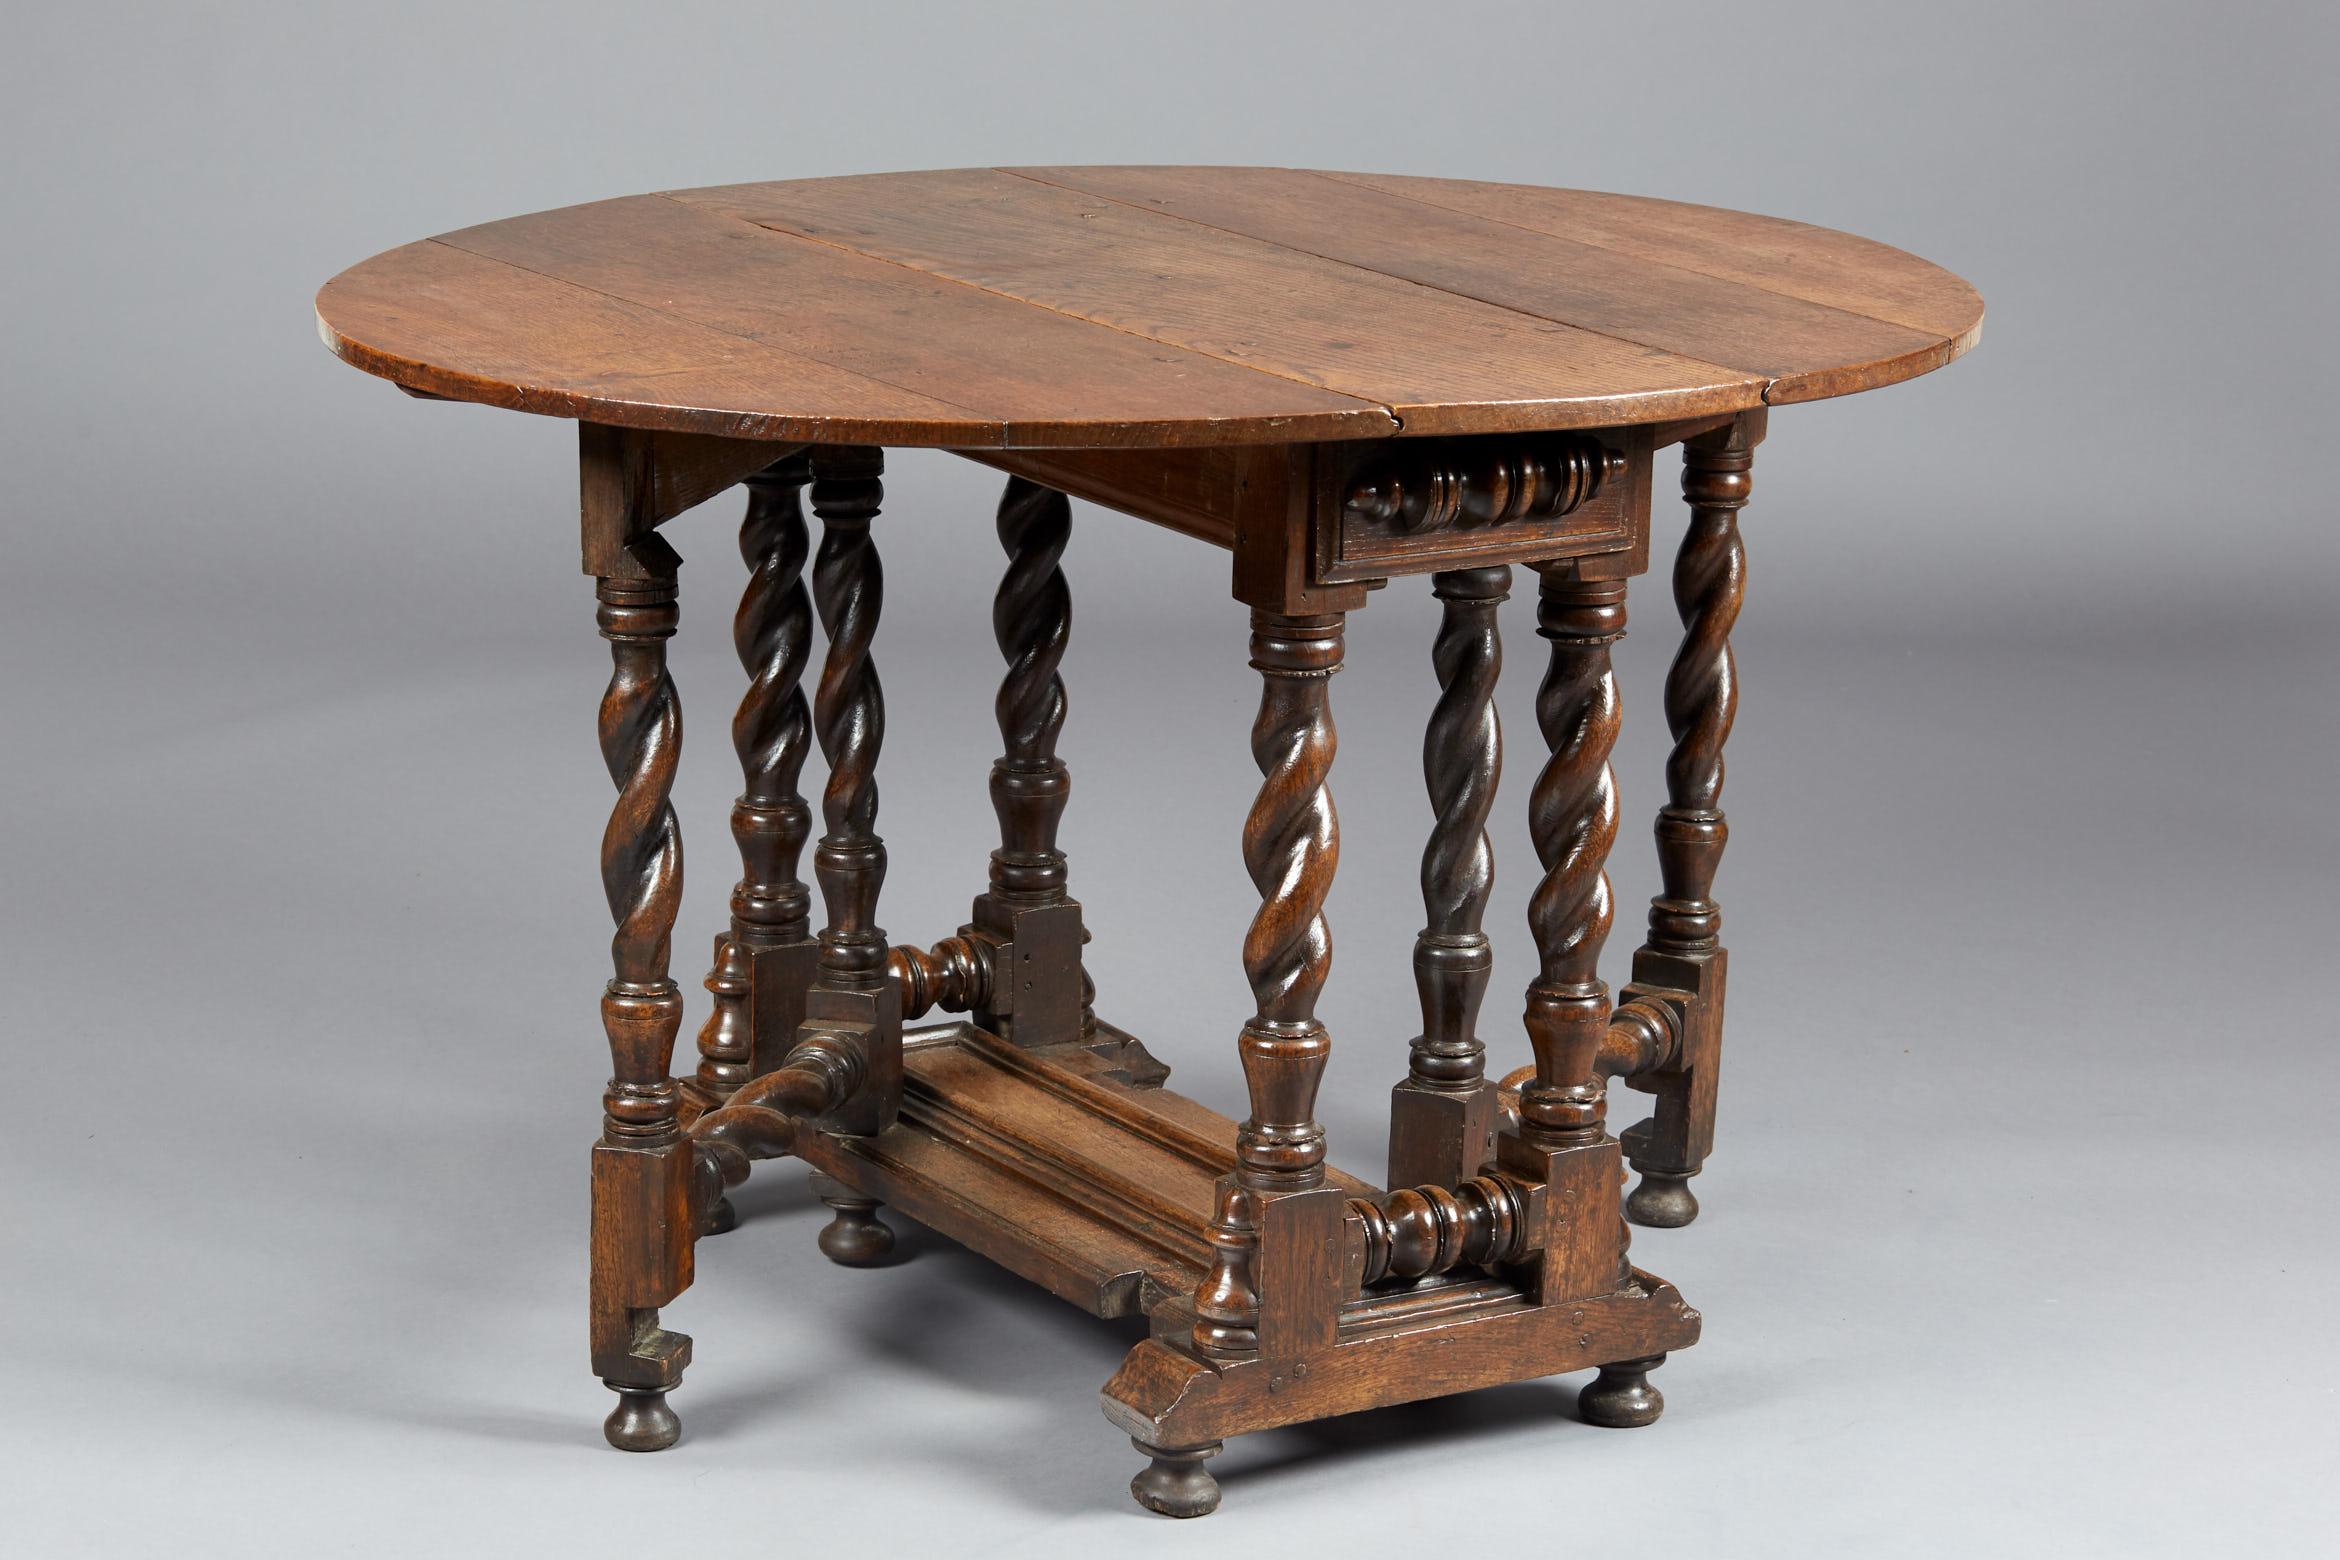 Rare Charles II / William & Mary oak gate leg table, English, circa 1670-1690.

The oval plank top above multi spiral twist legs with twin concealed action frieze drawers with applied split balusters, on a platform base with raised cushion